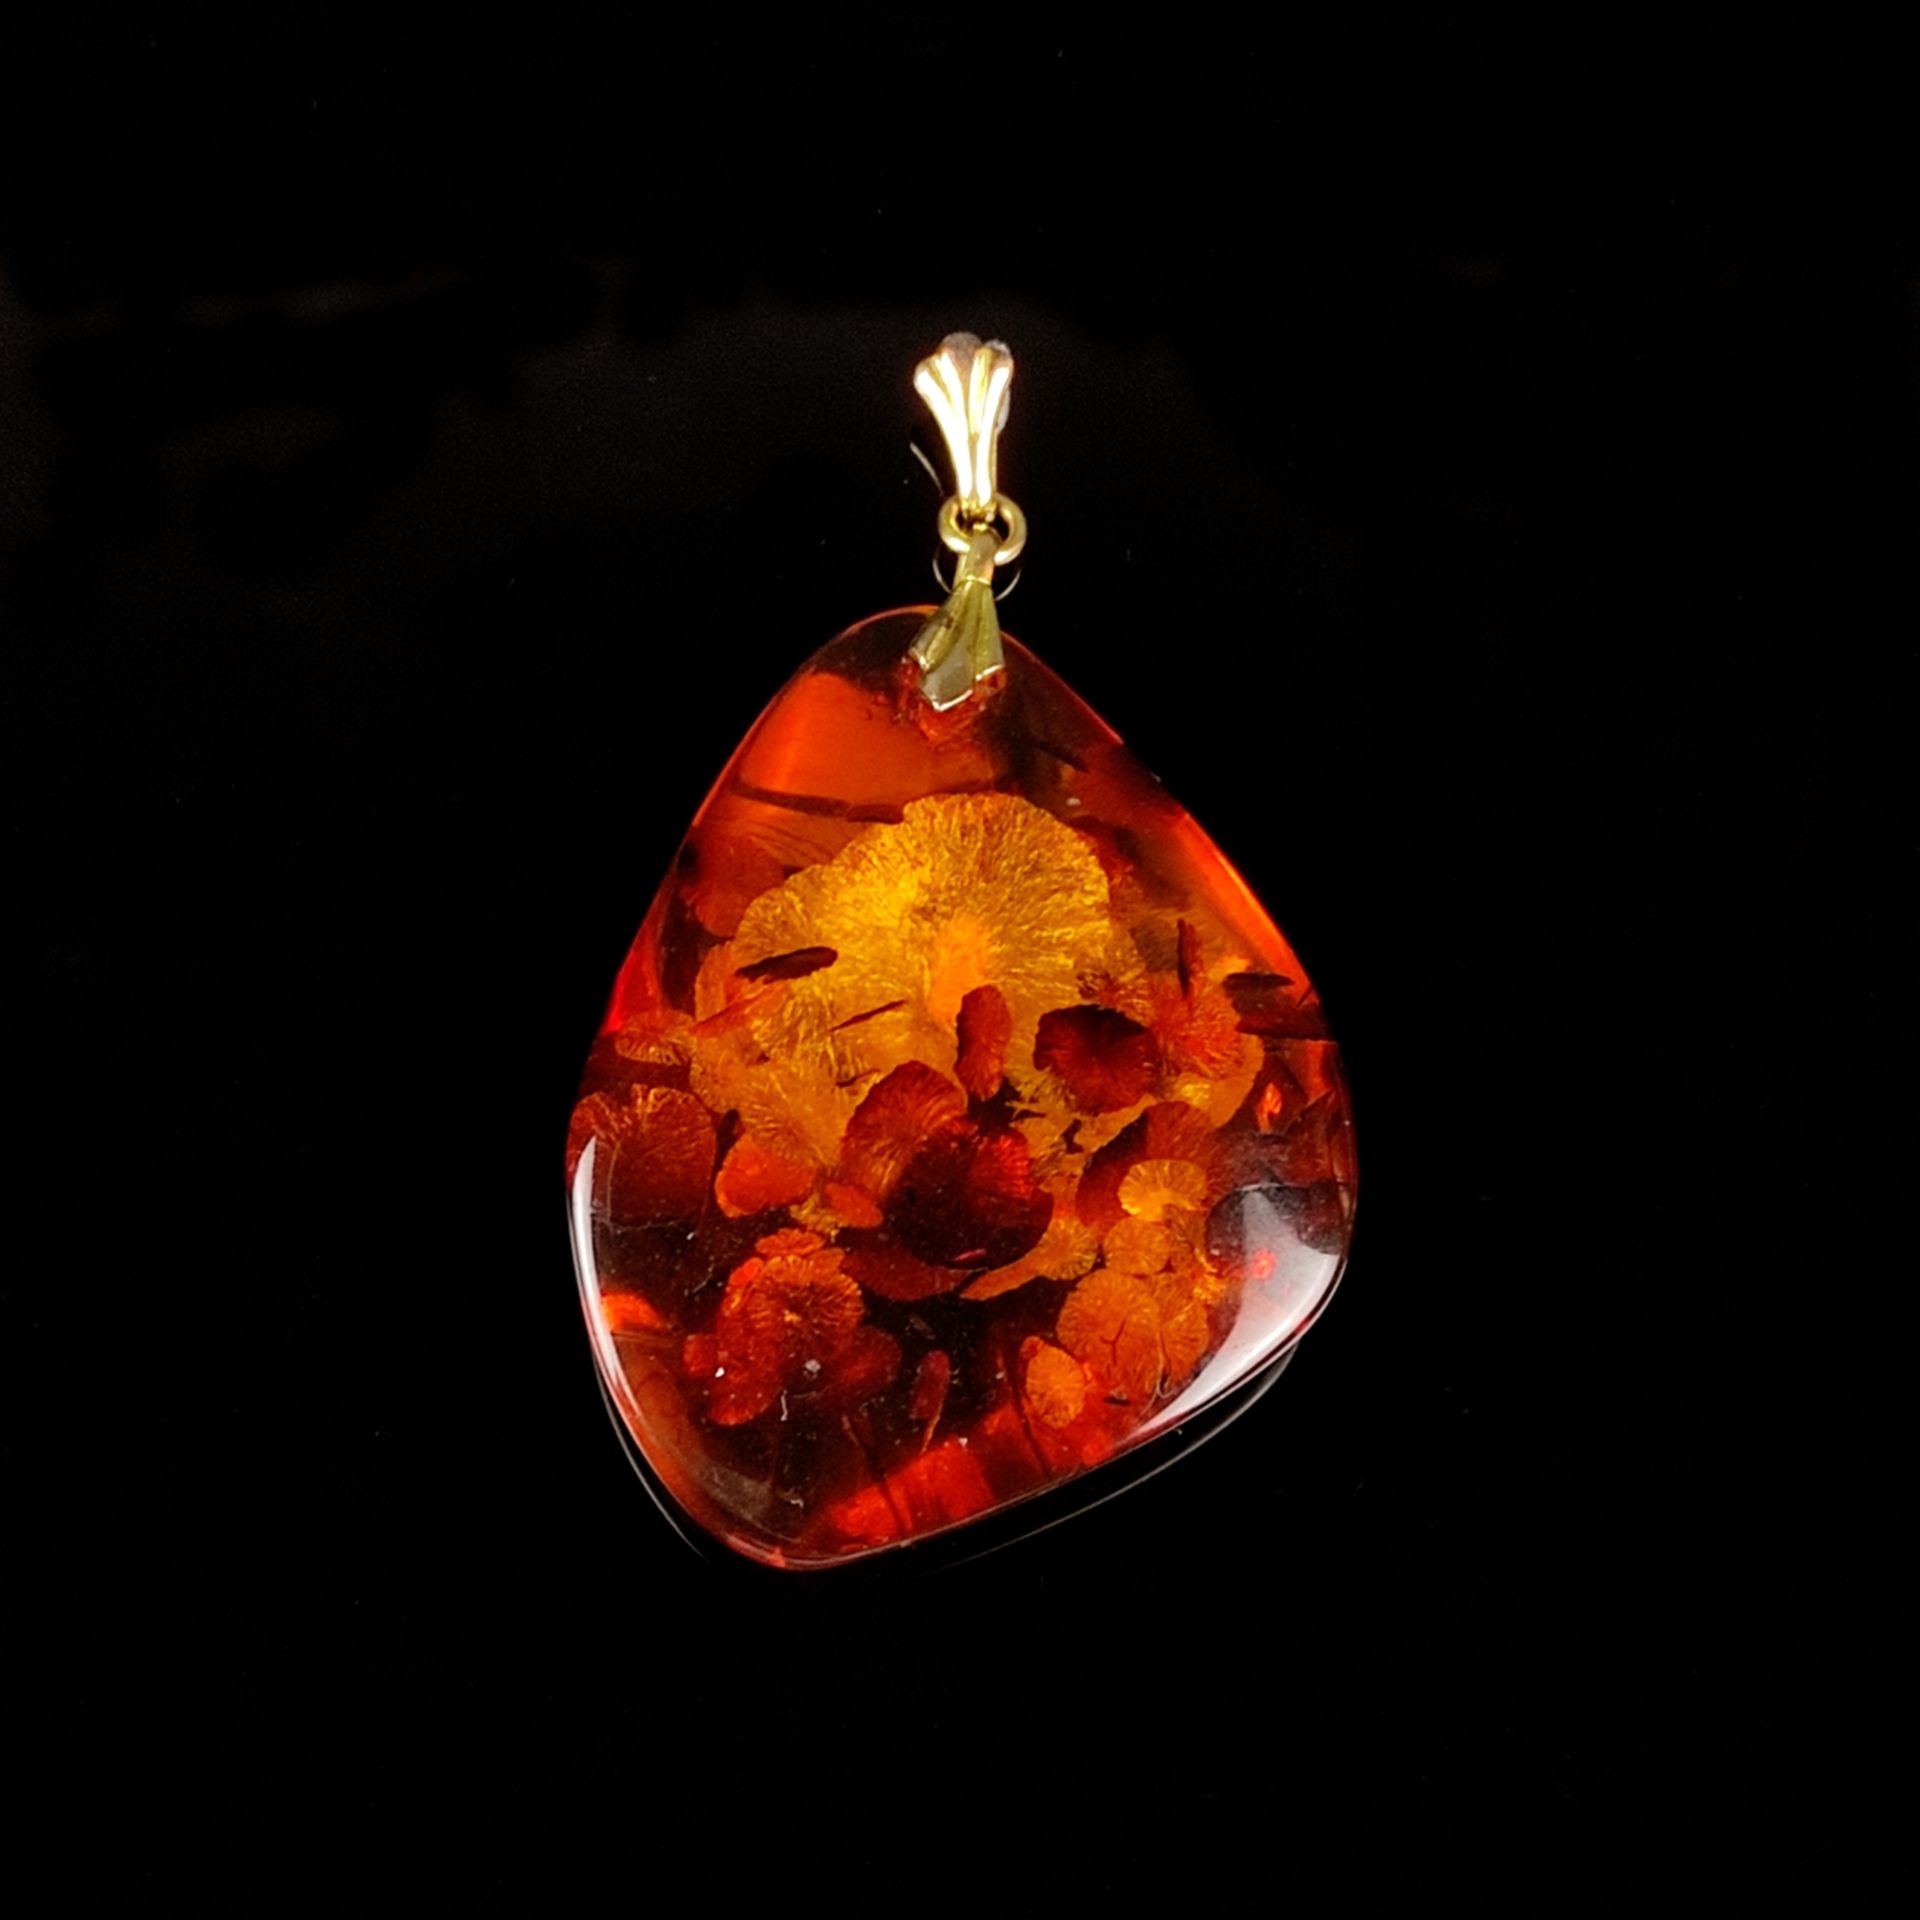 Amber pendant, Andreas Daub jewellery, 9.1g, large, teardrop-shaped amber pendant with natural incl